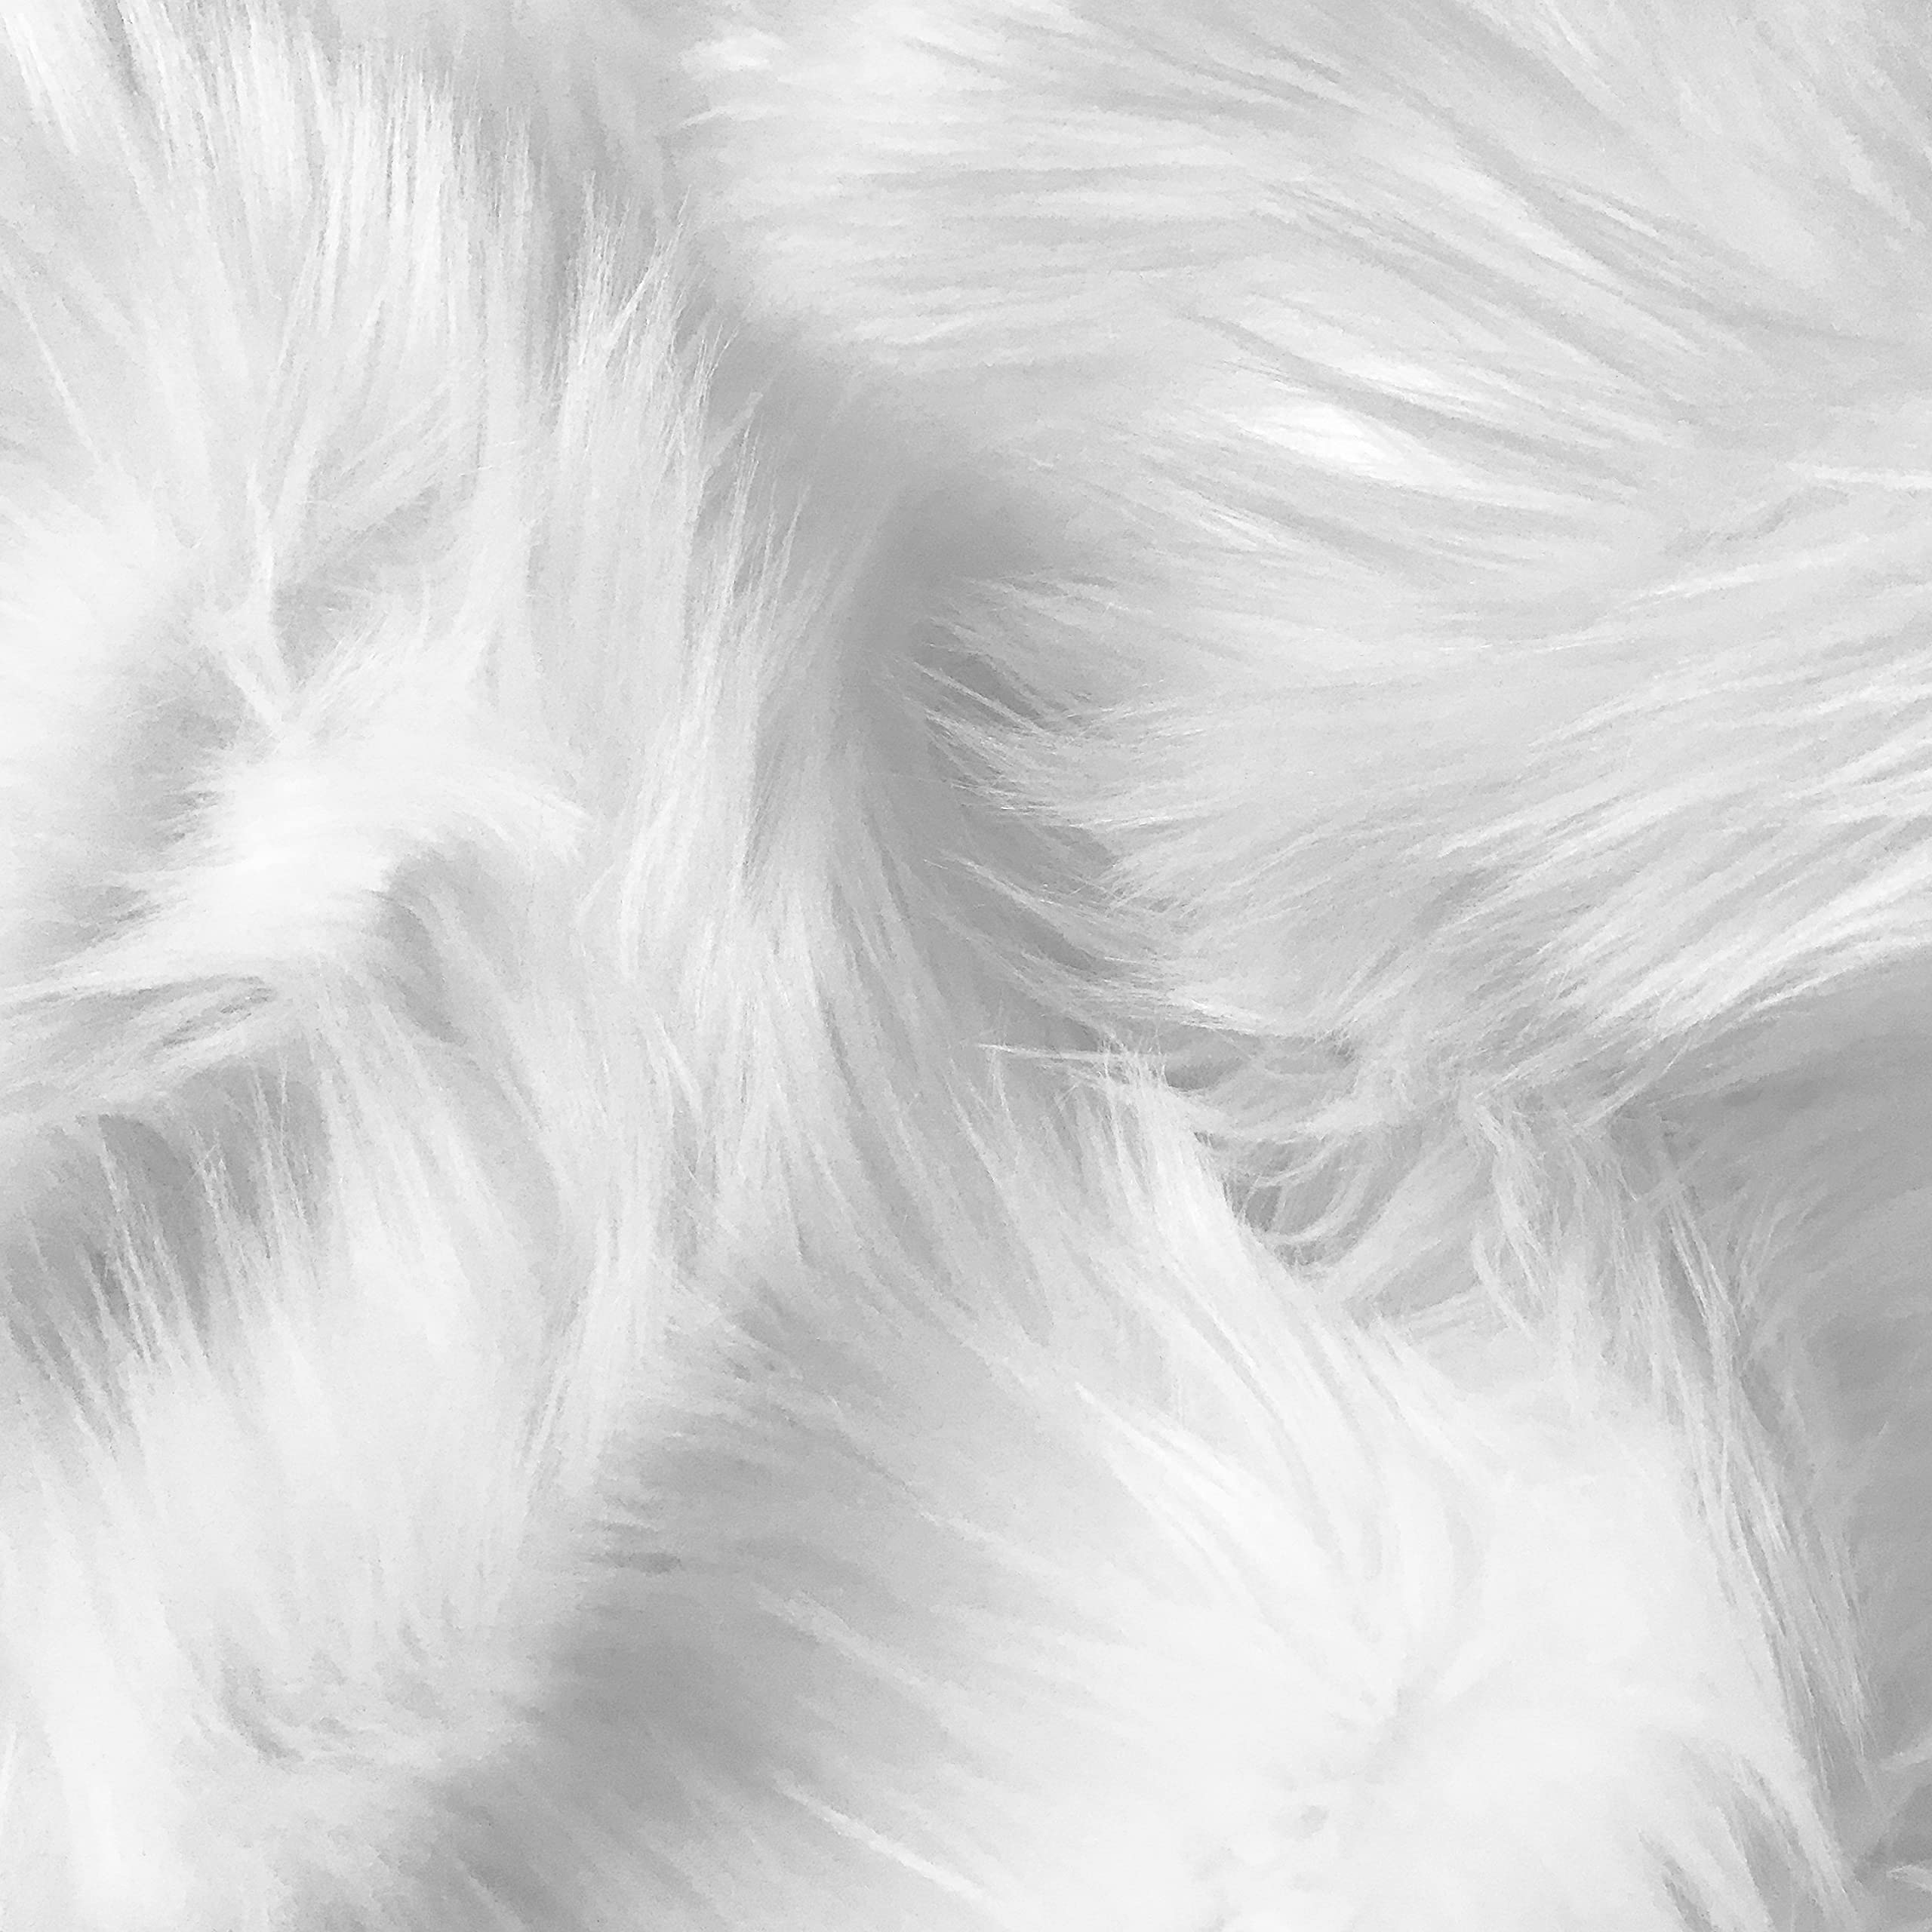 Bianna Creations Faux Fur Piece, Square Rectangle Swatch, Luxury Shag Shaggy Fabric, DIY Craft Fur (White, 12x12 inches)